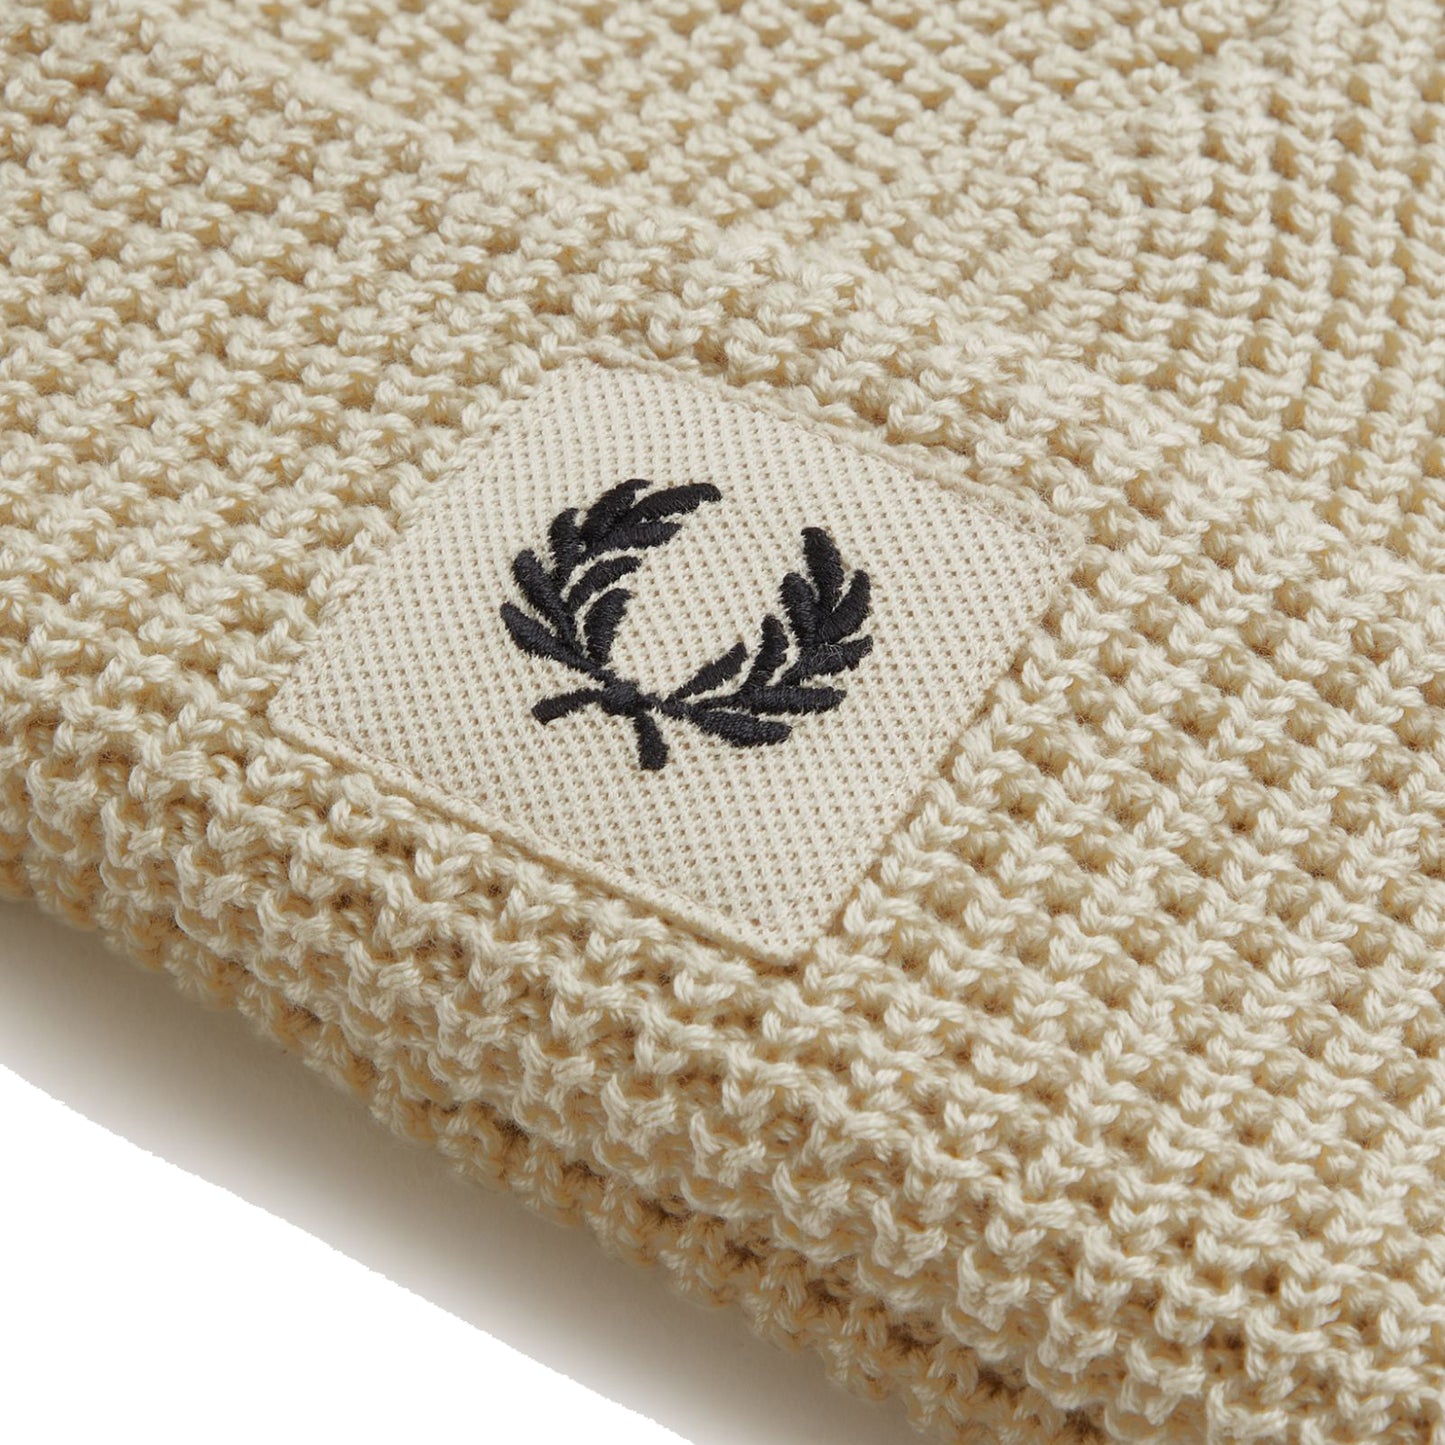 Fred Perry Waffle Knit Beanie